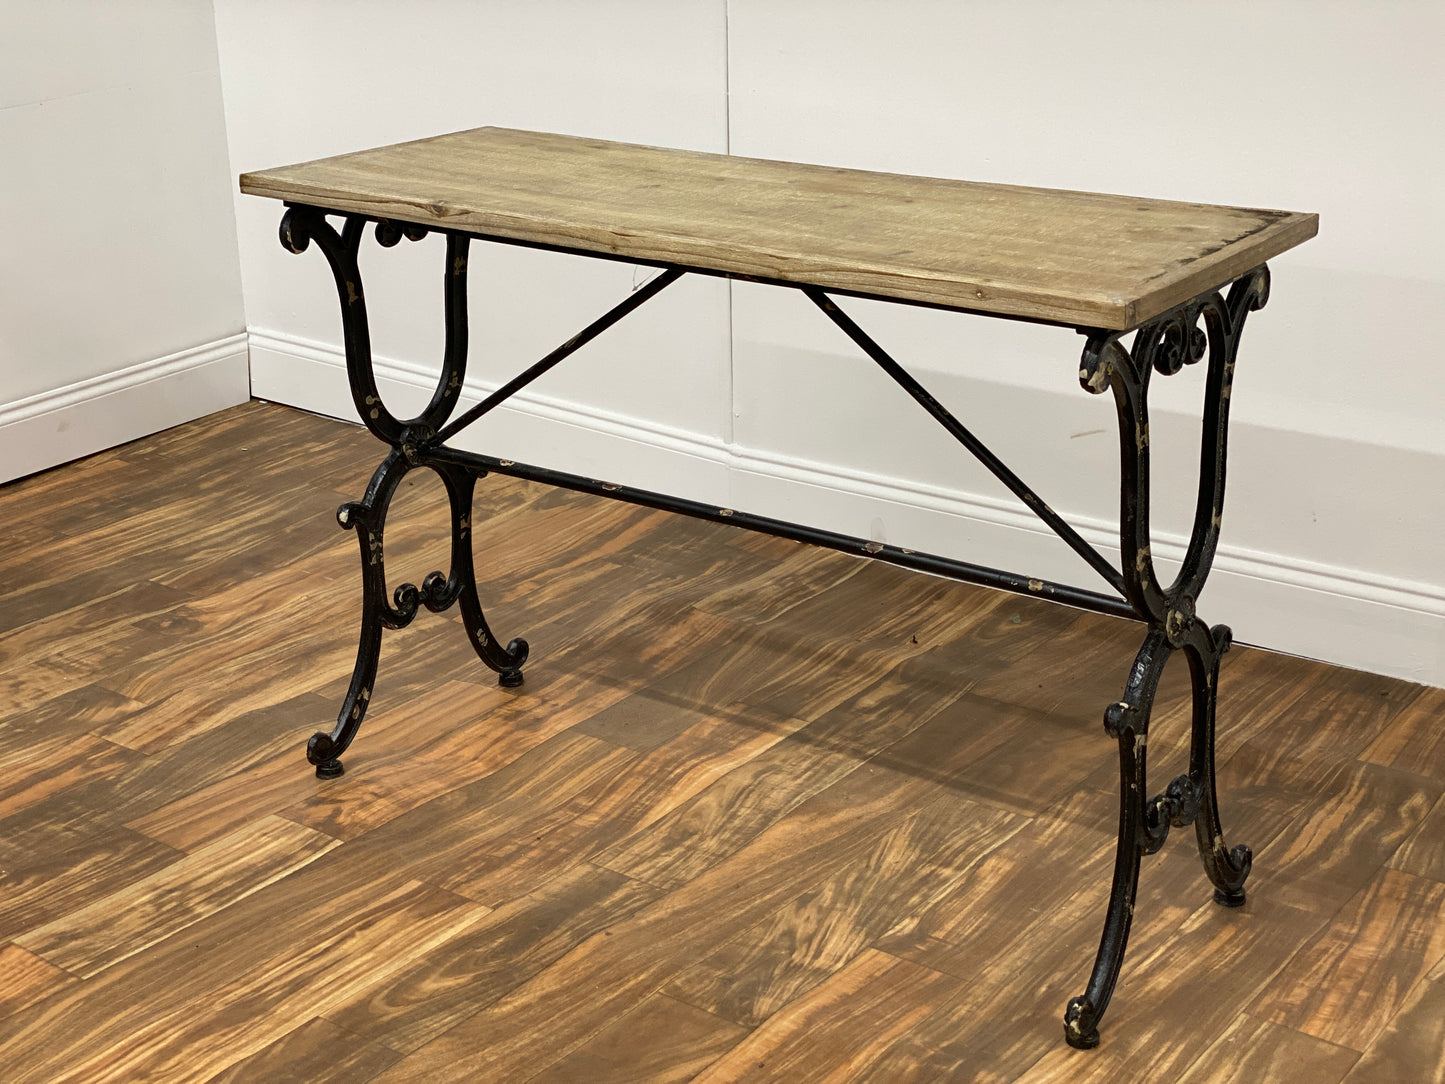 WOOD TOP IRON LEG CONSOLE TABLE